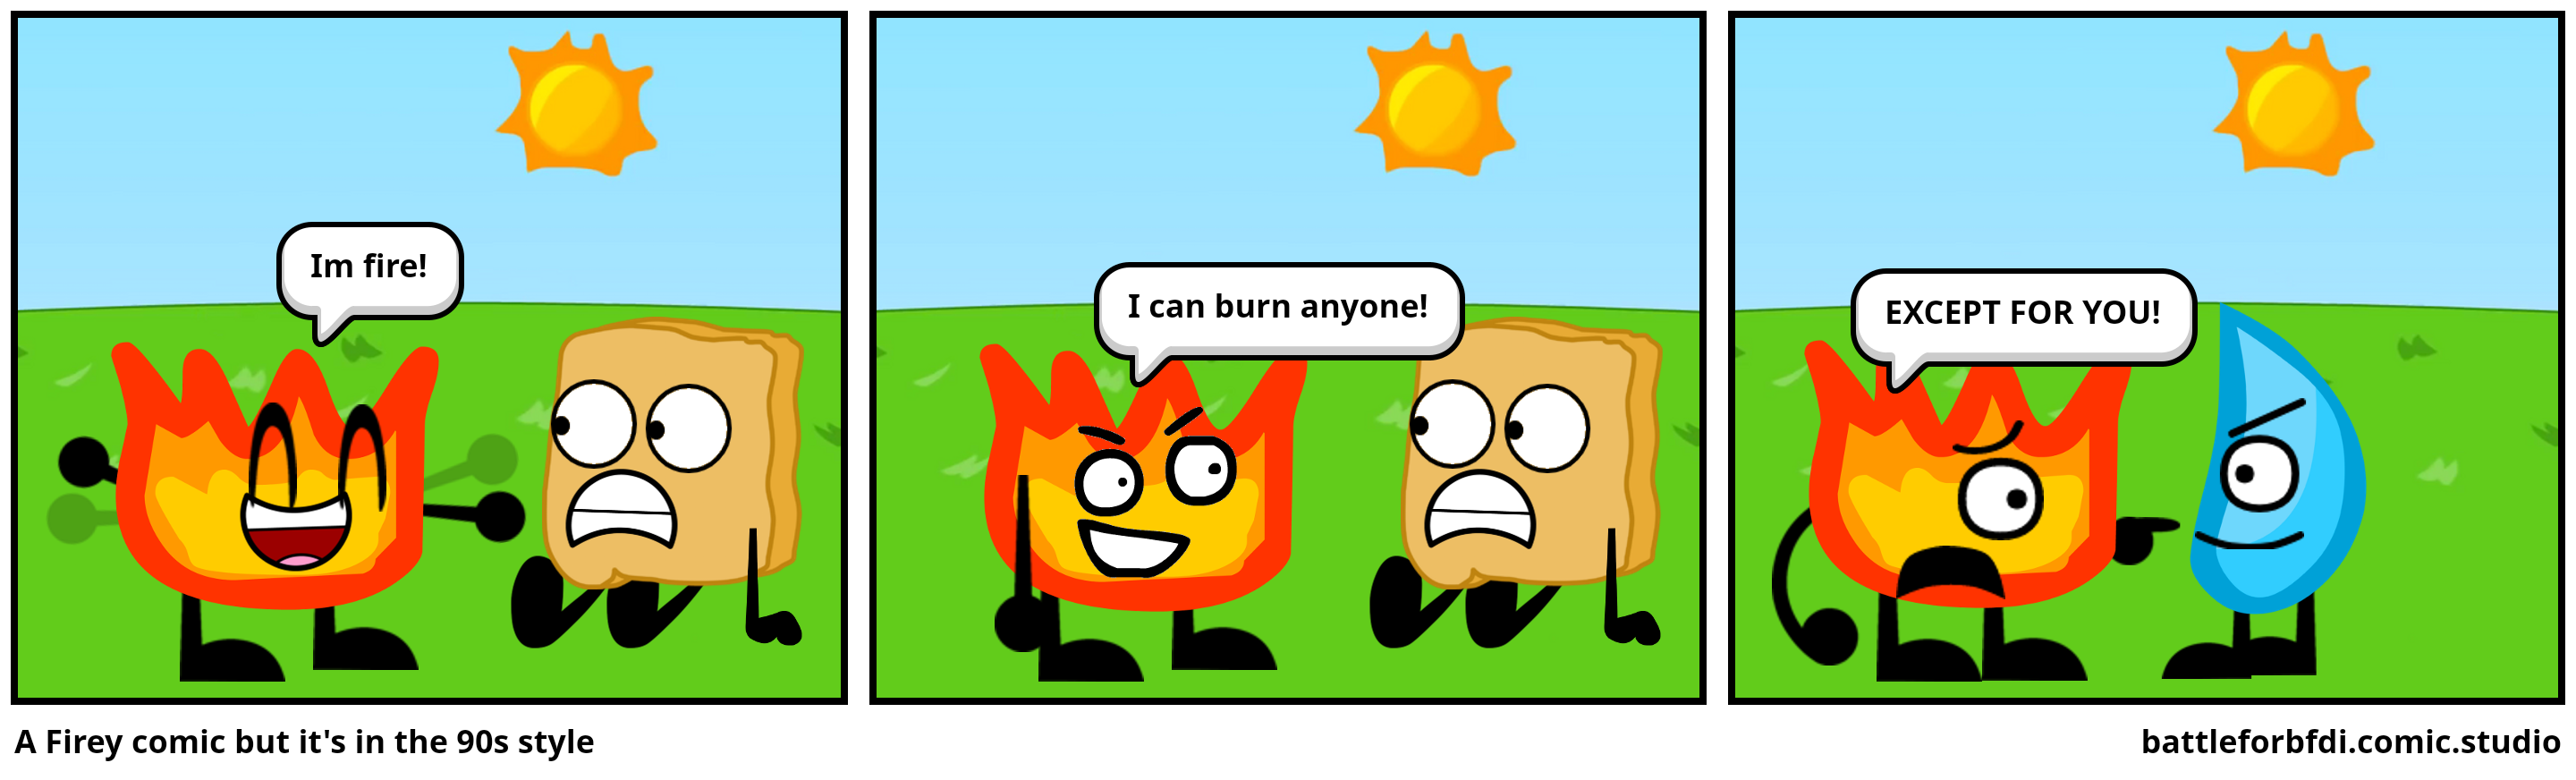 A Firey comic but it's in the 90s style